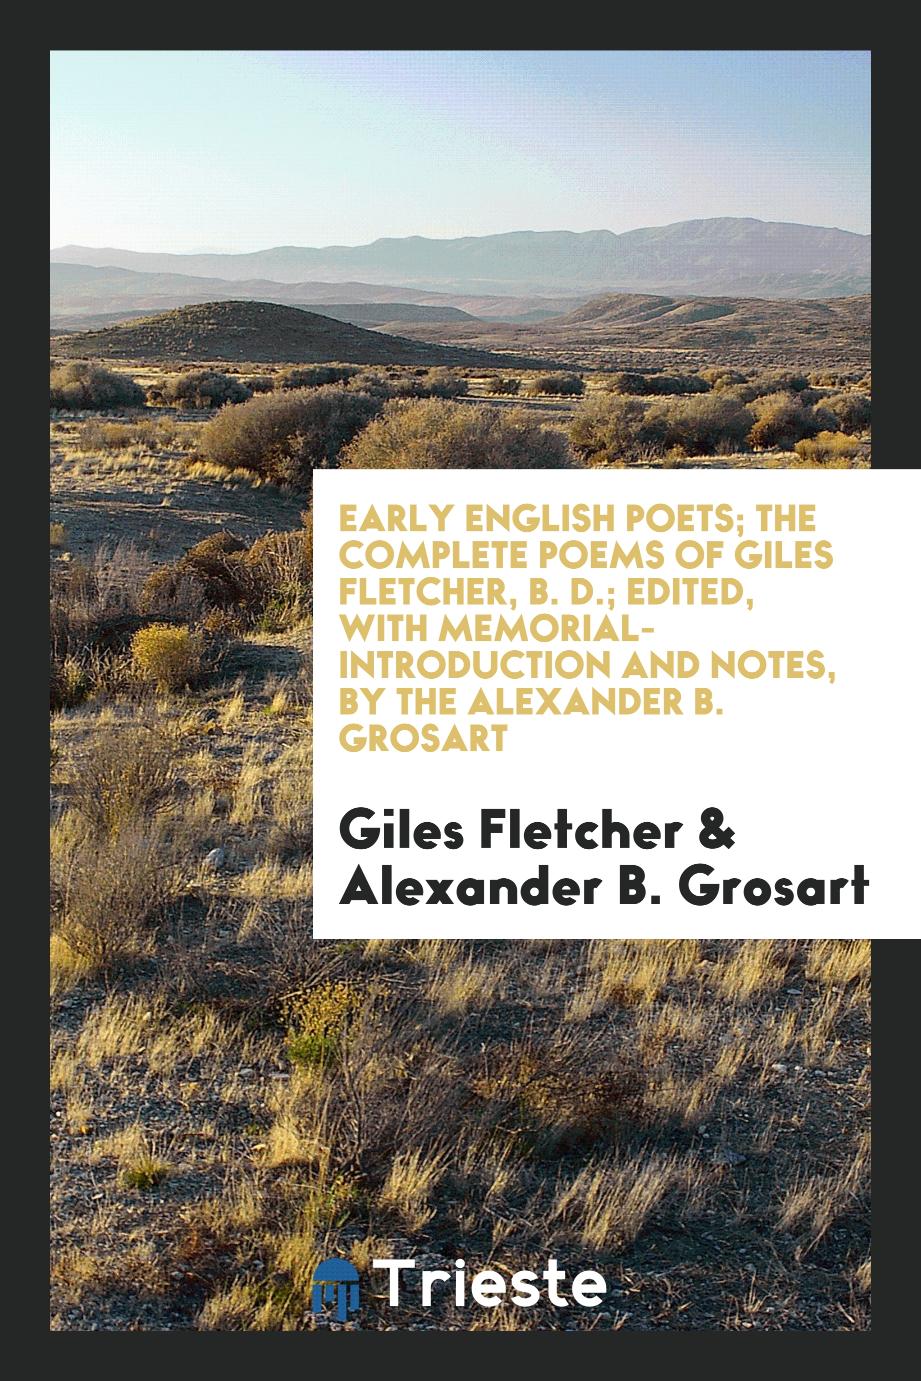 Early English Poets; The Complete Poems of Giles Fletcher, B. D.; Edited, with Memorial-Introduction and Notes, by the Alexander B. Grosart